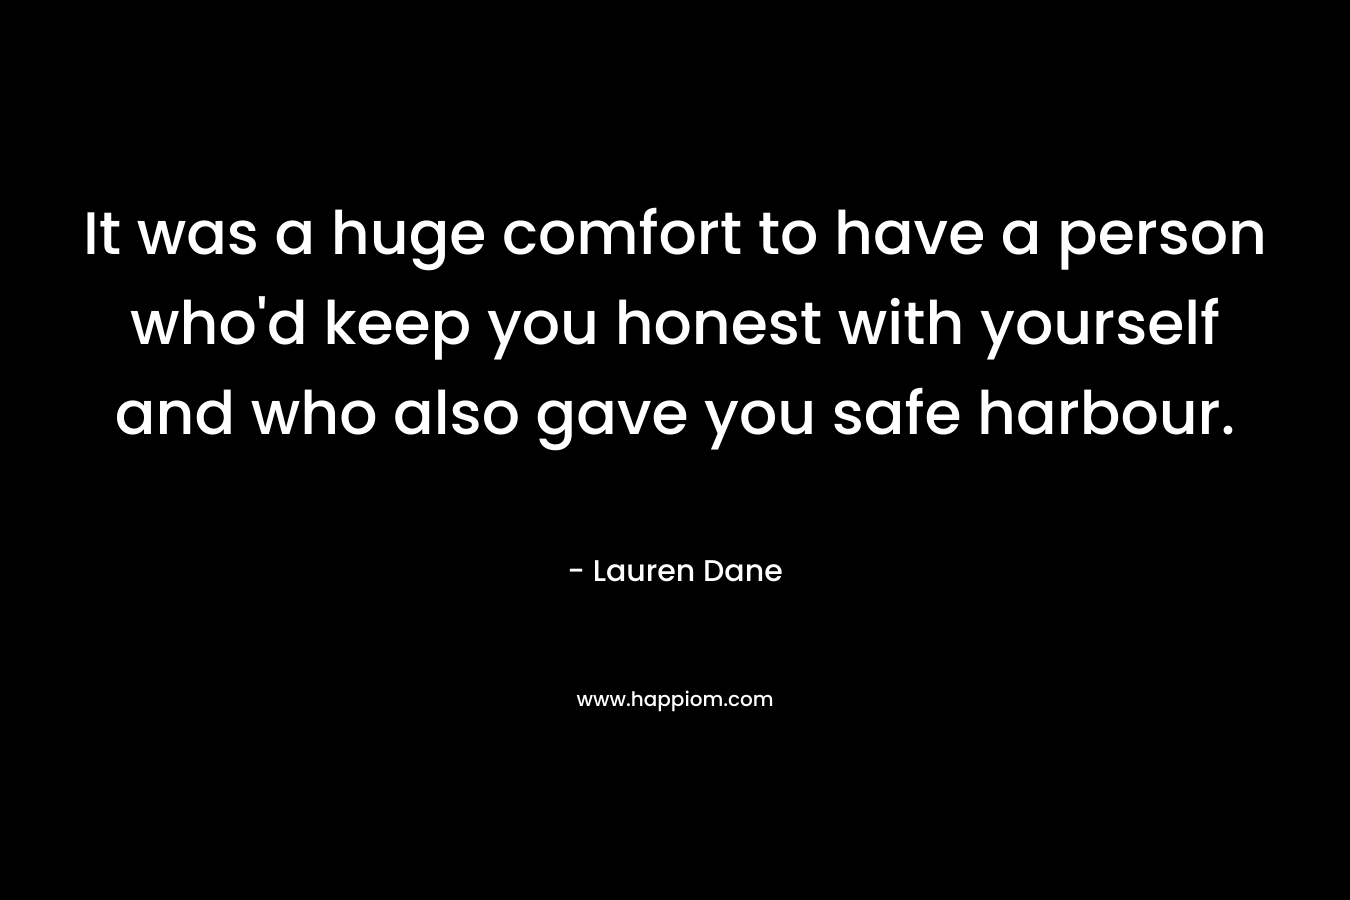 It was a huge comfort to have a person who'd keep you honest with yourself and who also gave you safe harbour.